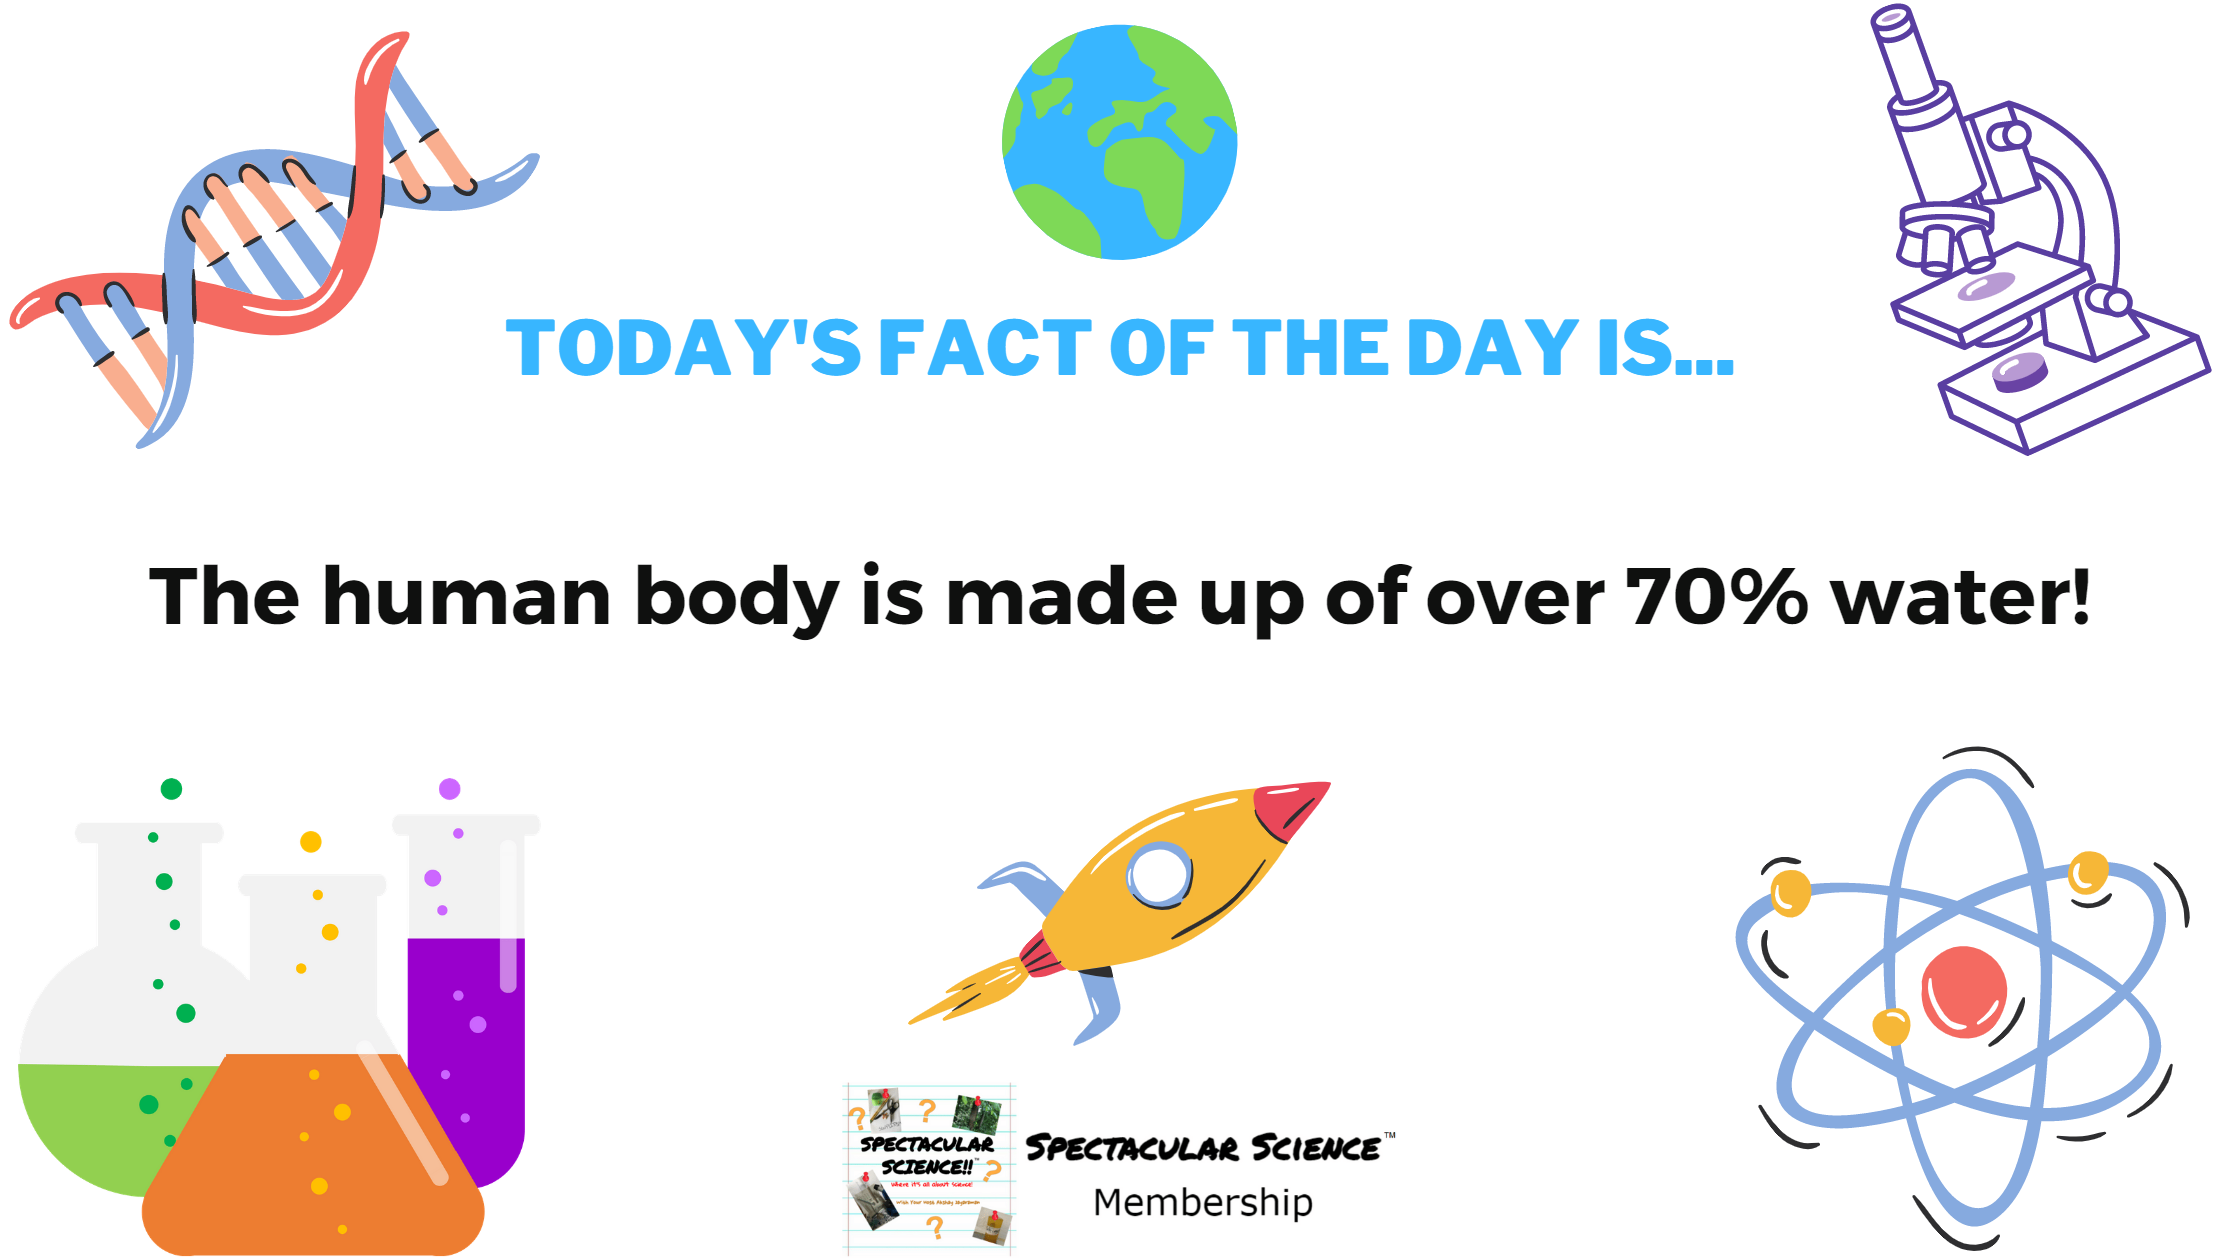 Fact of the Day Image May 15